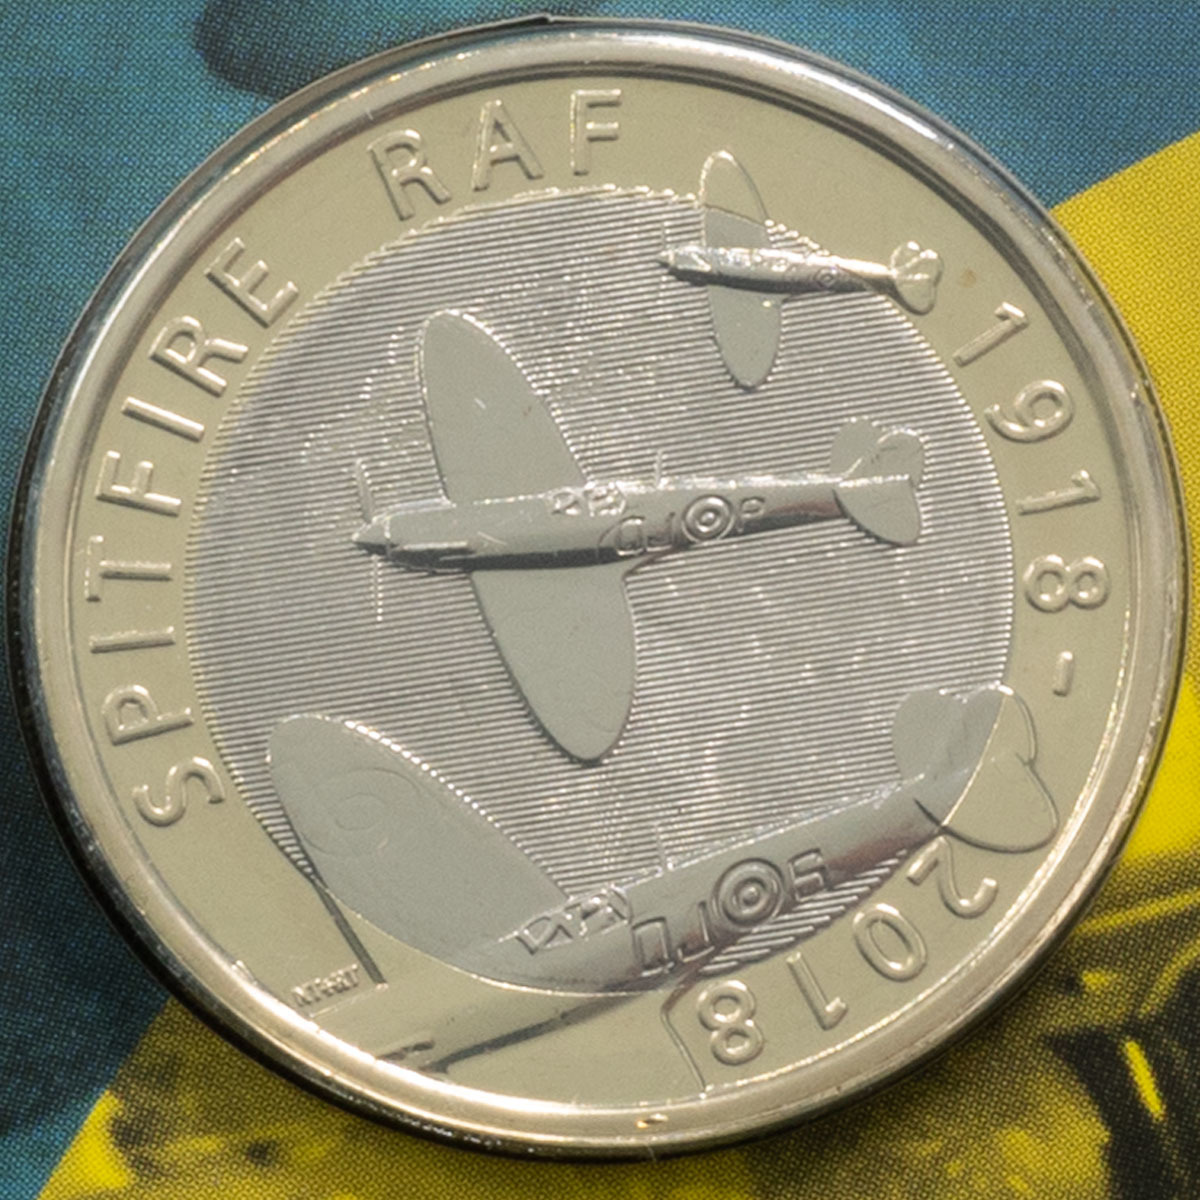 UK18SPBU 2018 RAF Royal Air Force Centenary Spitfire Two Pound Brilliant Uncirculated Coin In Folder Reverse